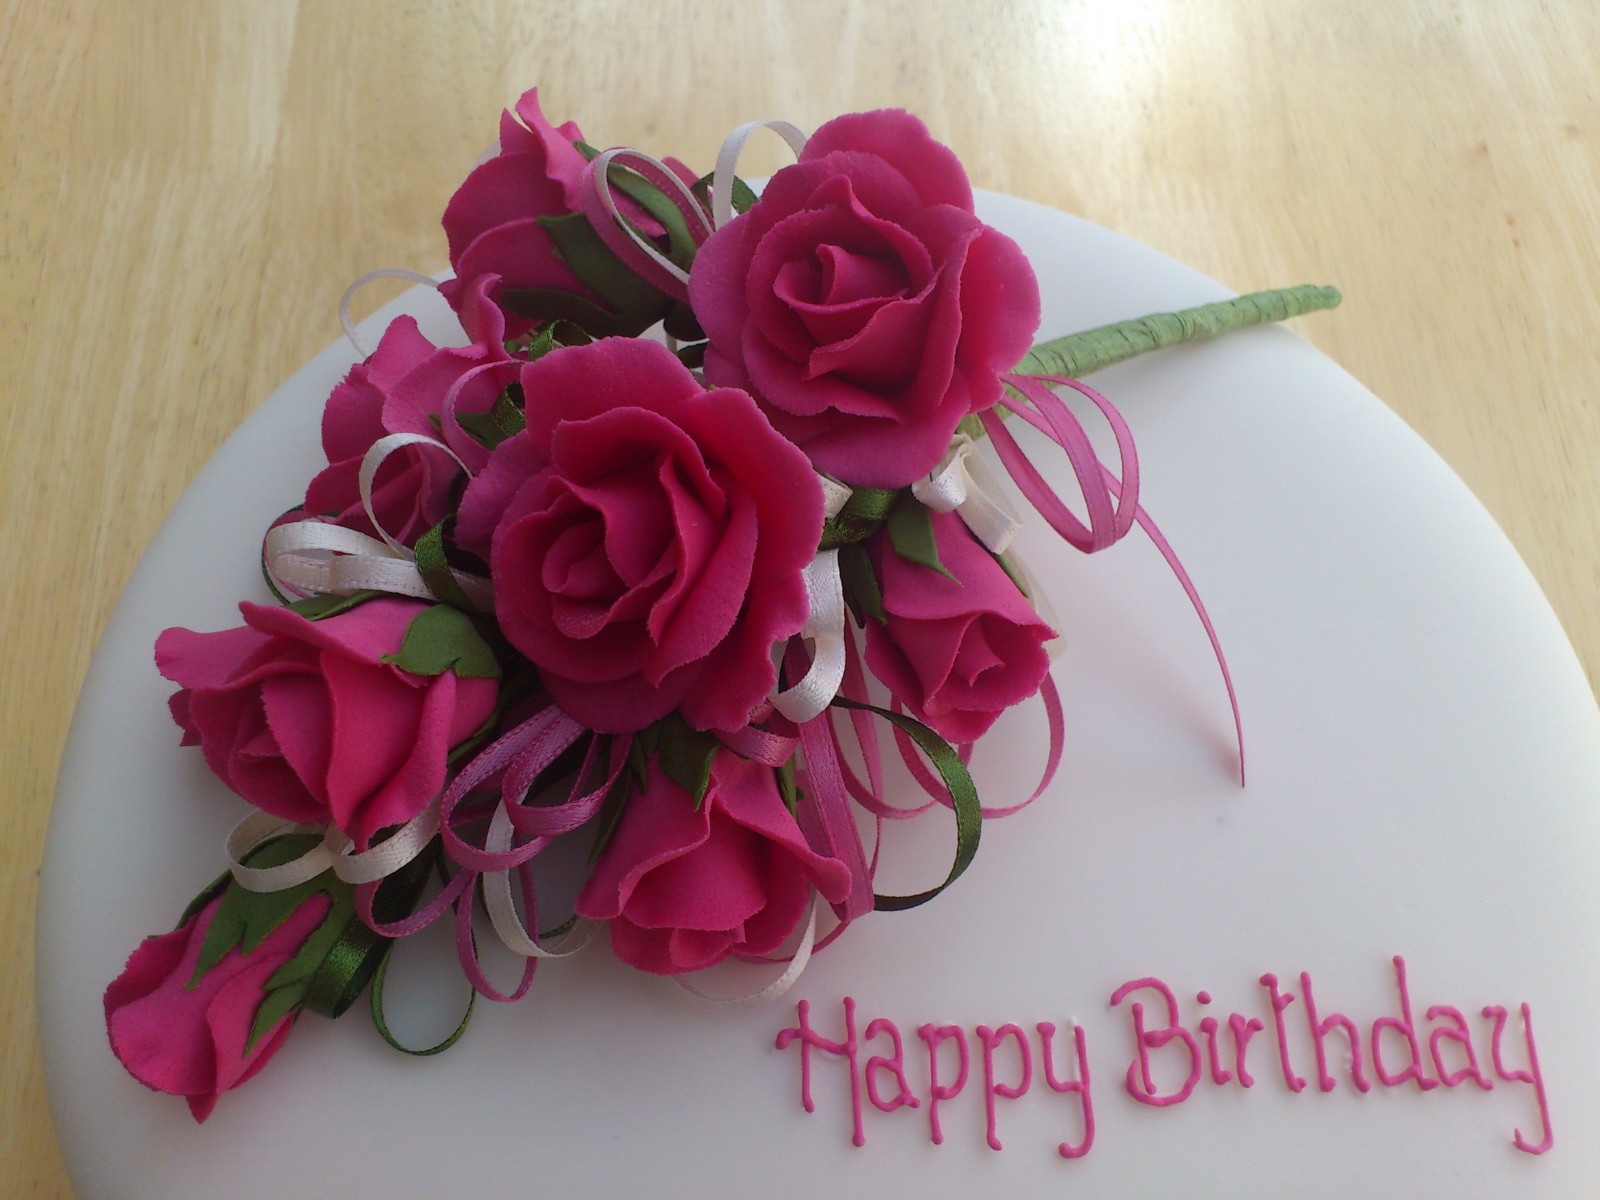 Happy Birthday Cake with Pink Roses